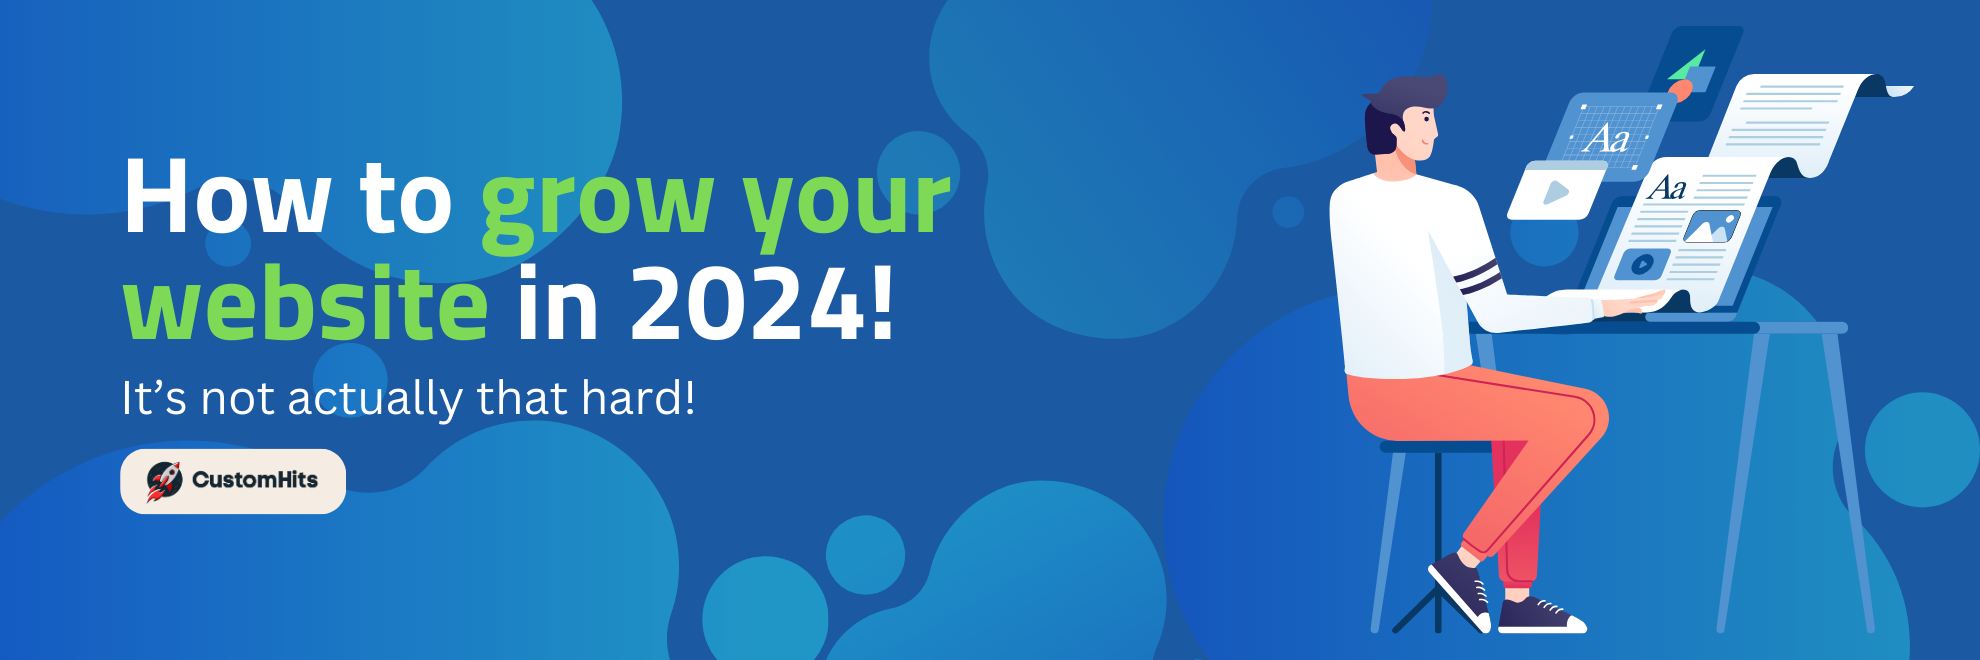 How to grow your website in 2024! Not actually that hard!